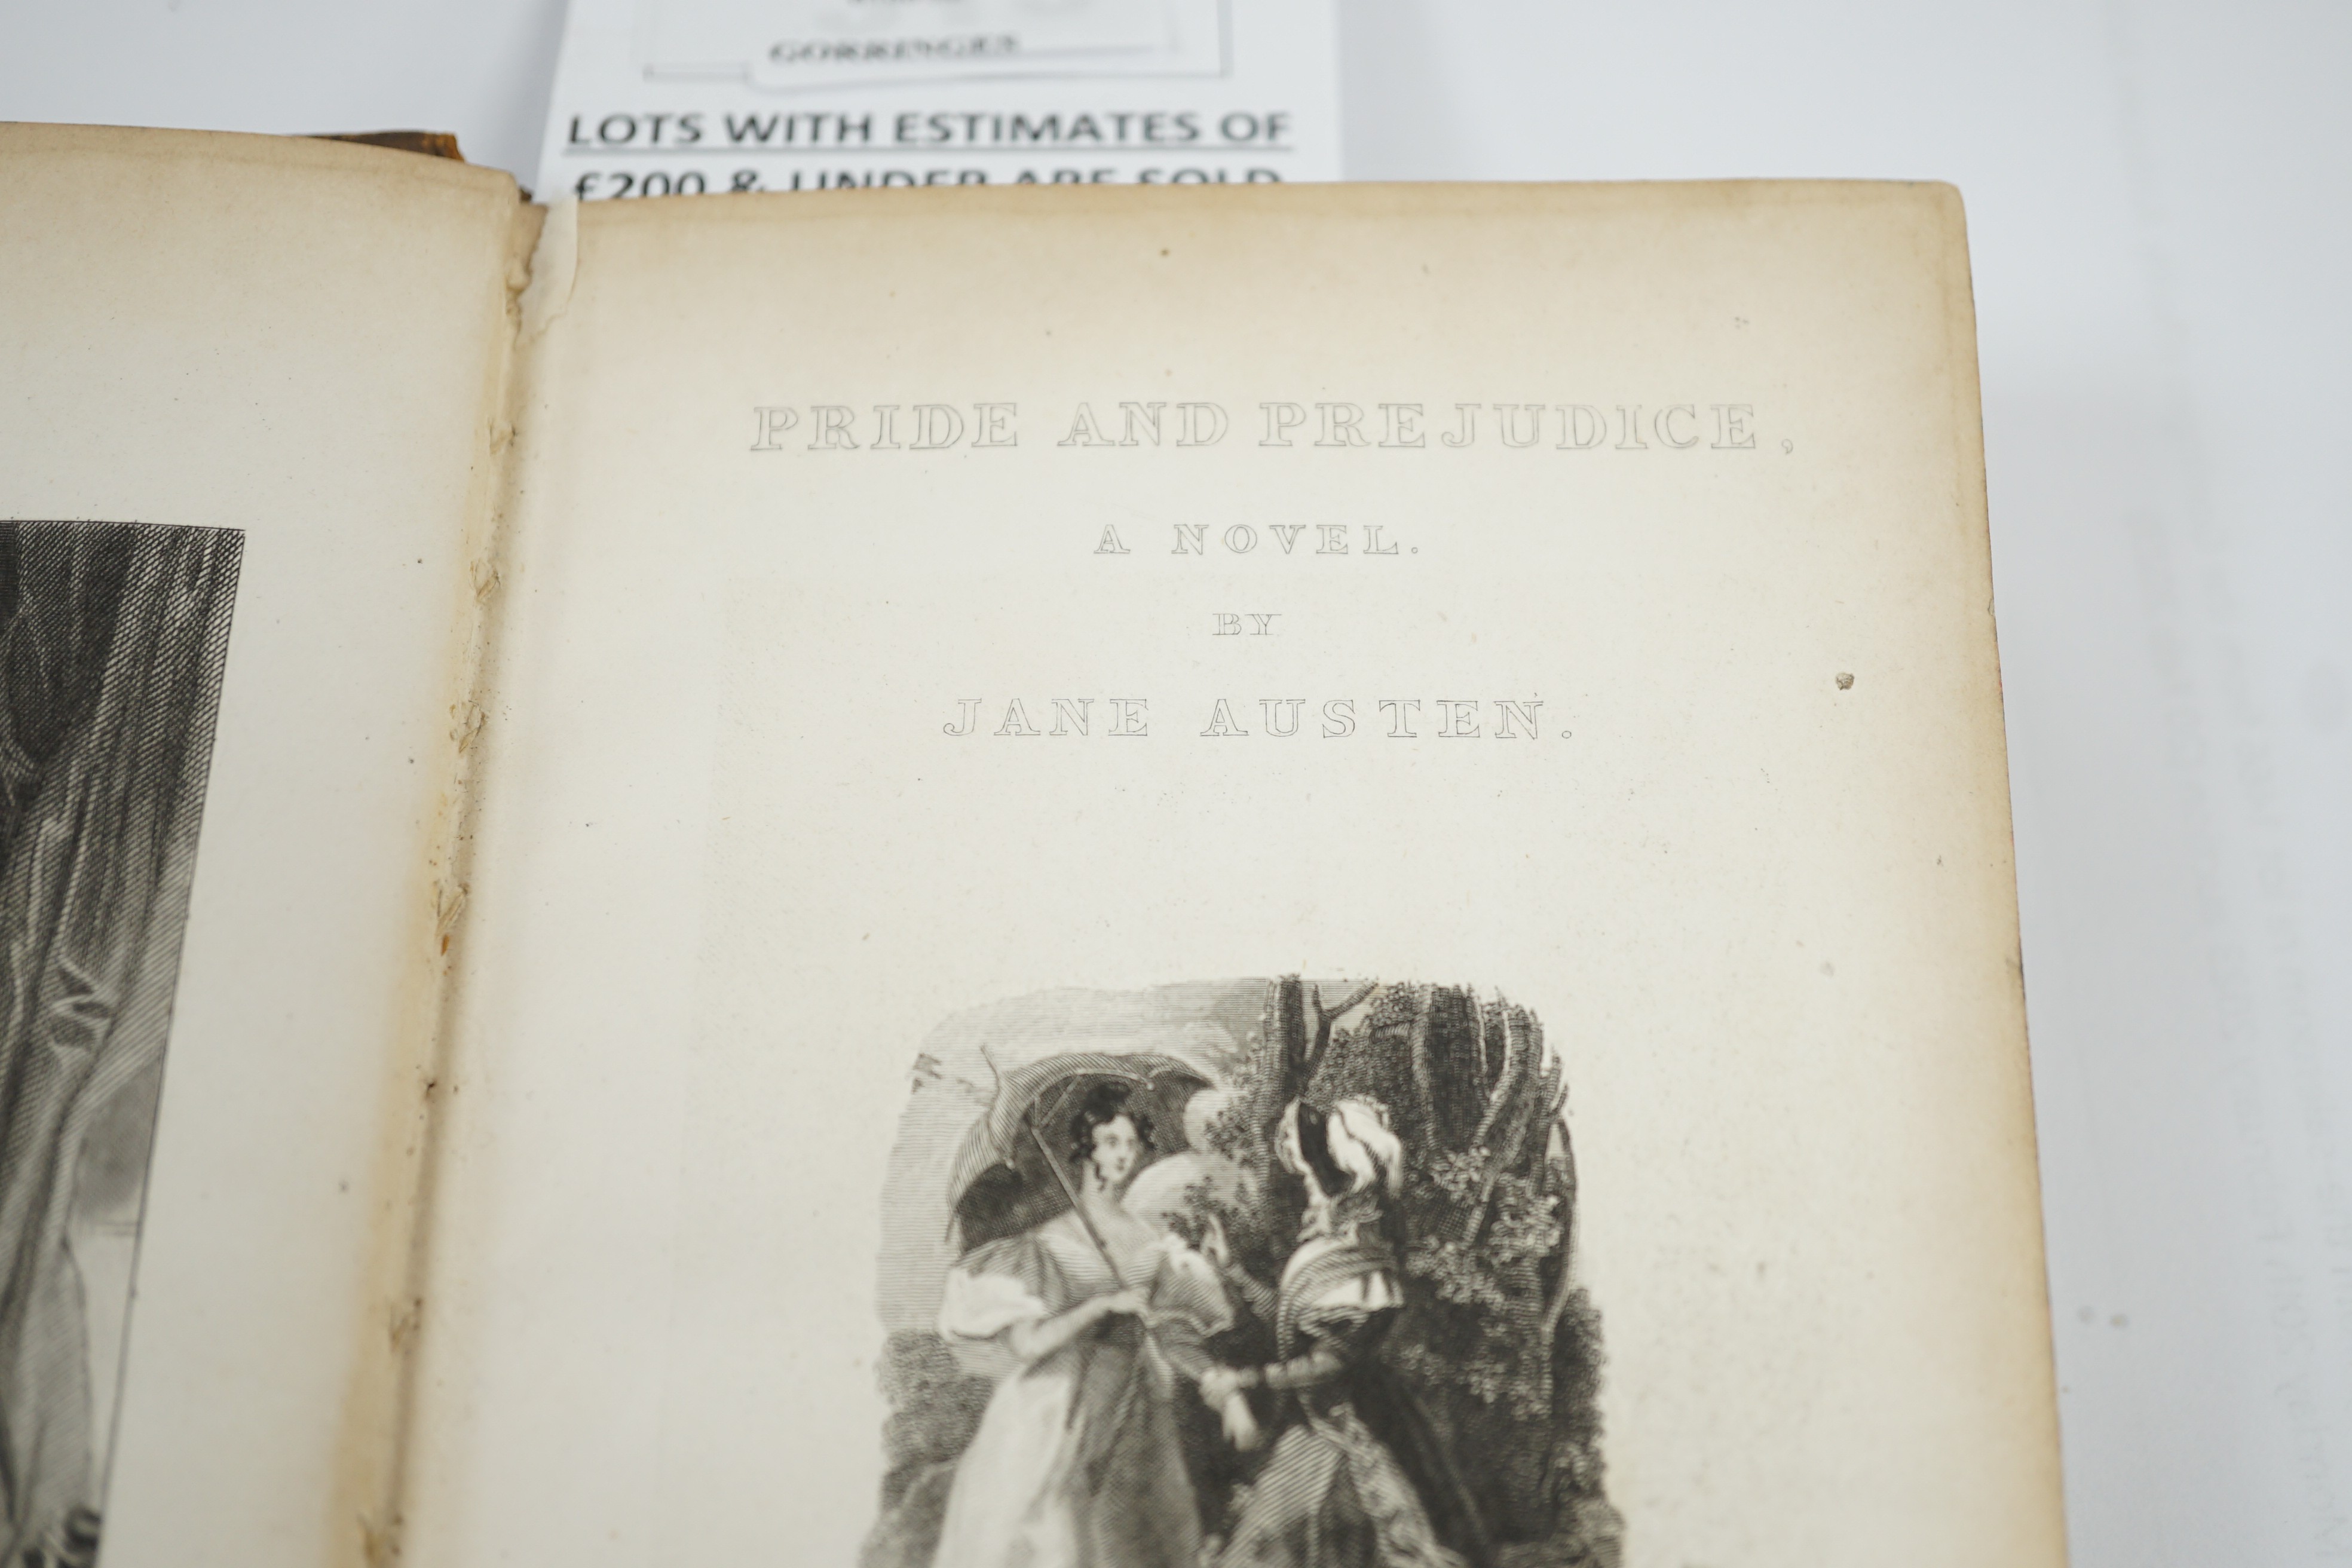 Austen, Jane - Pride and Prejudice. A Novel. First Collected Edition. pictorial engraved and printed titles, frontis; mid 19th century half calf and marbled boards, panelled spine with black label